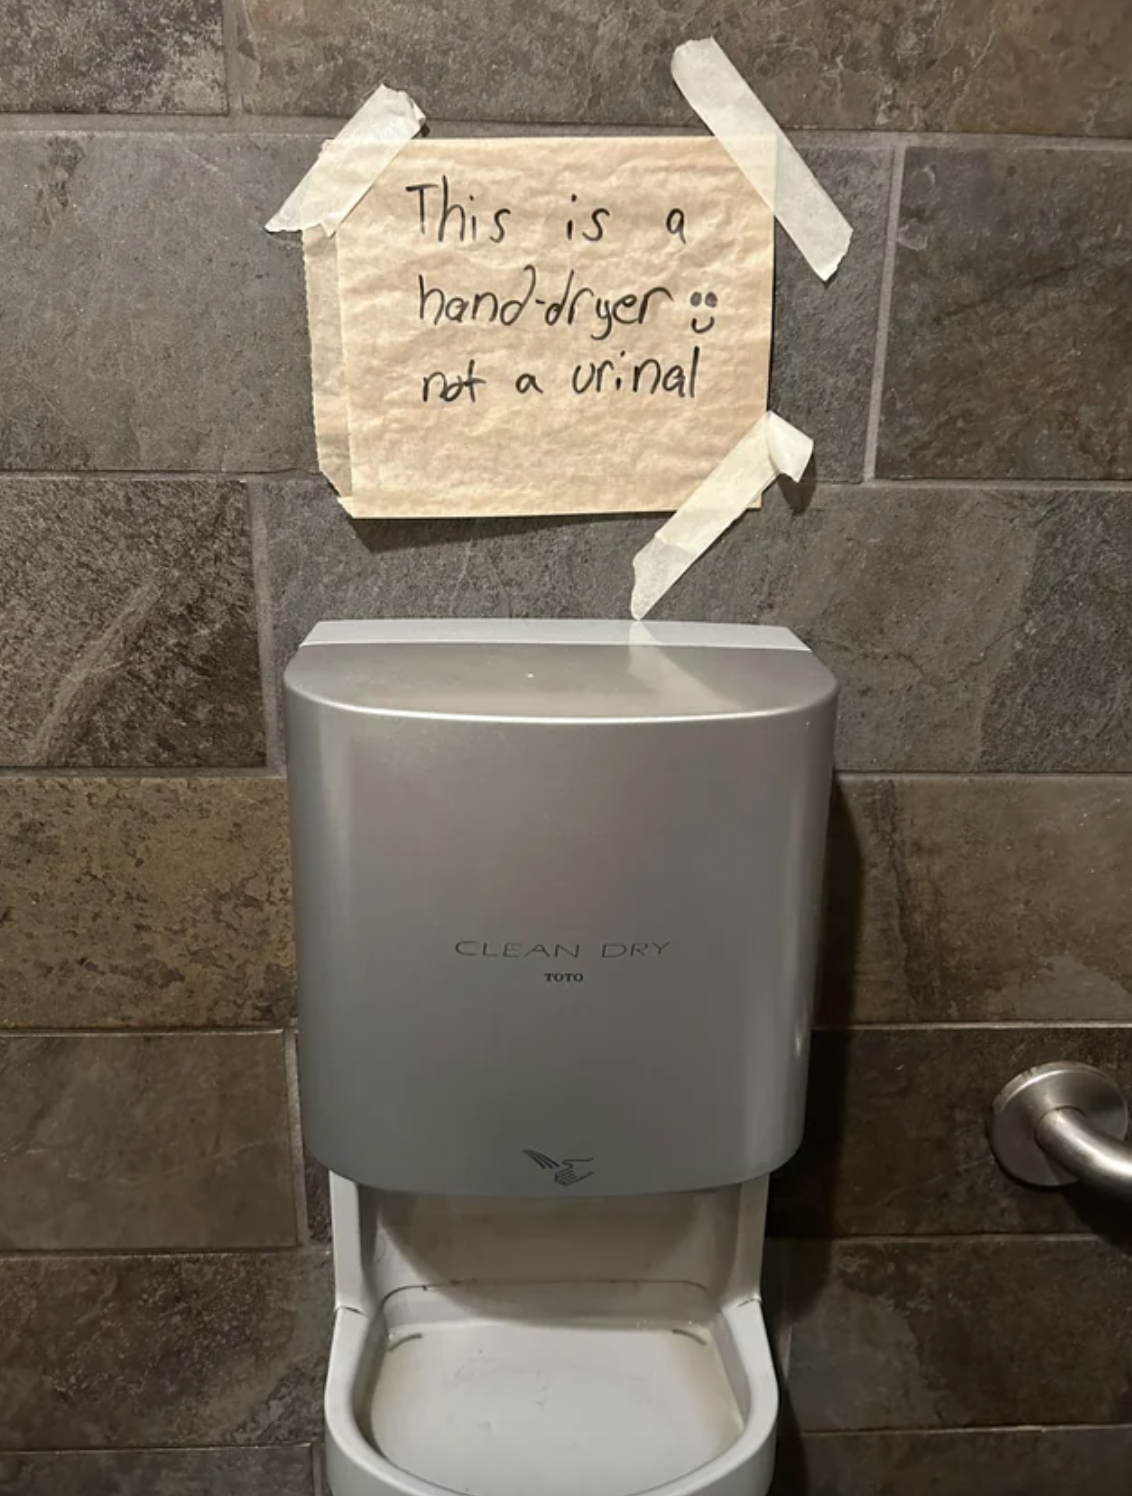 &quot;This is a hand dryer not a urinal&quot; above what looks like a small urinal